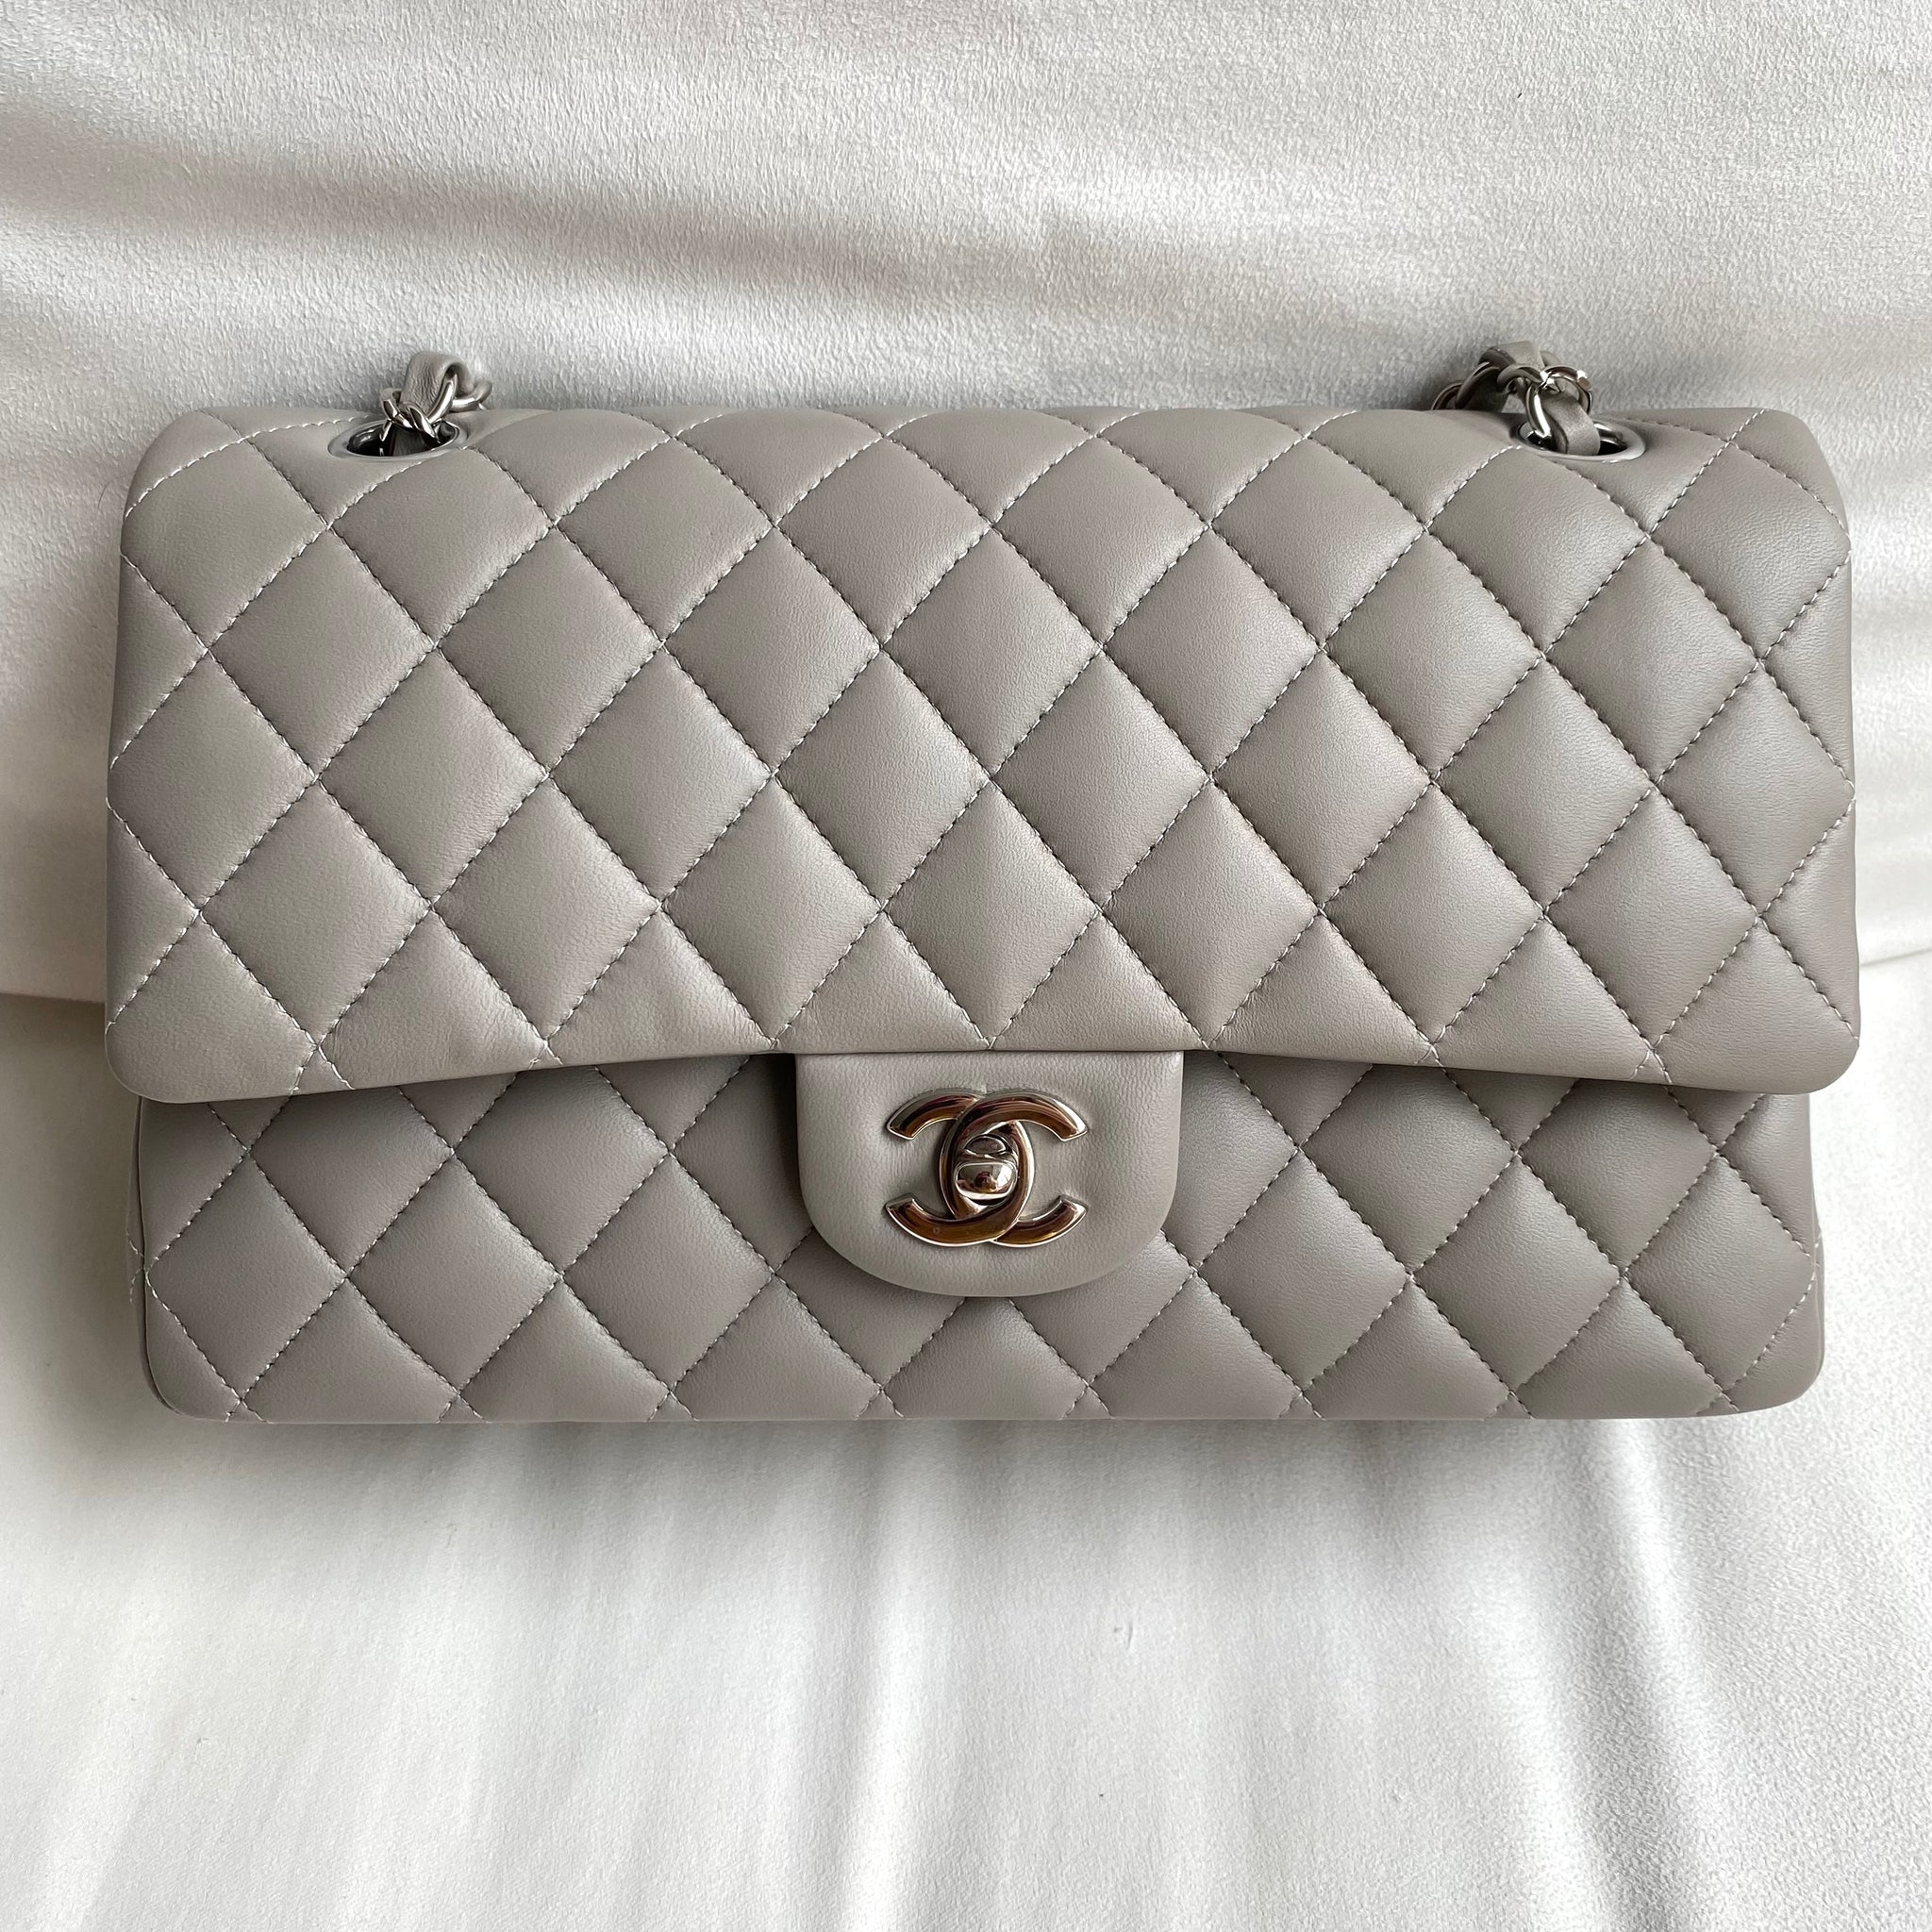 Which would you have chosen Regret purchasing lambskin mini top handle  r chanel